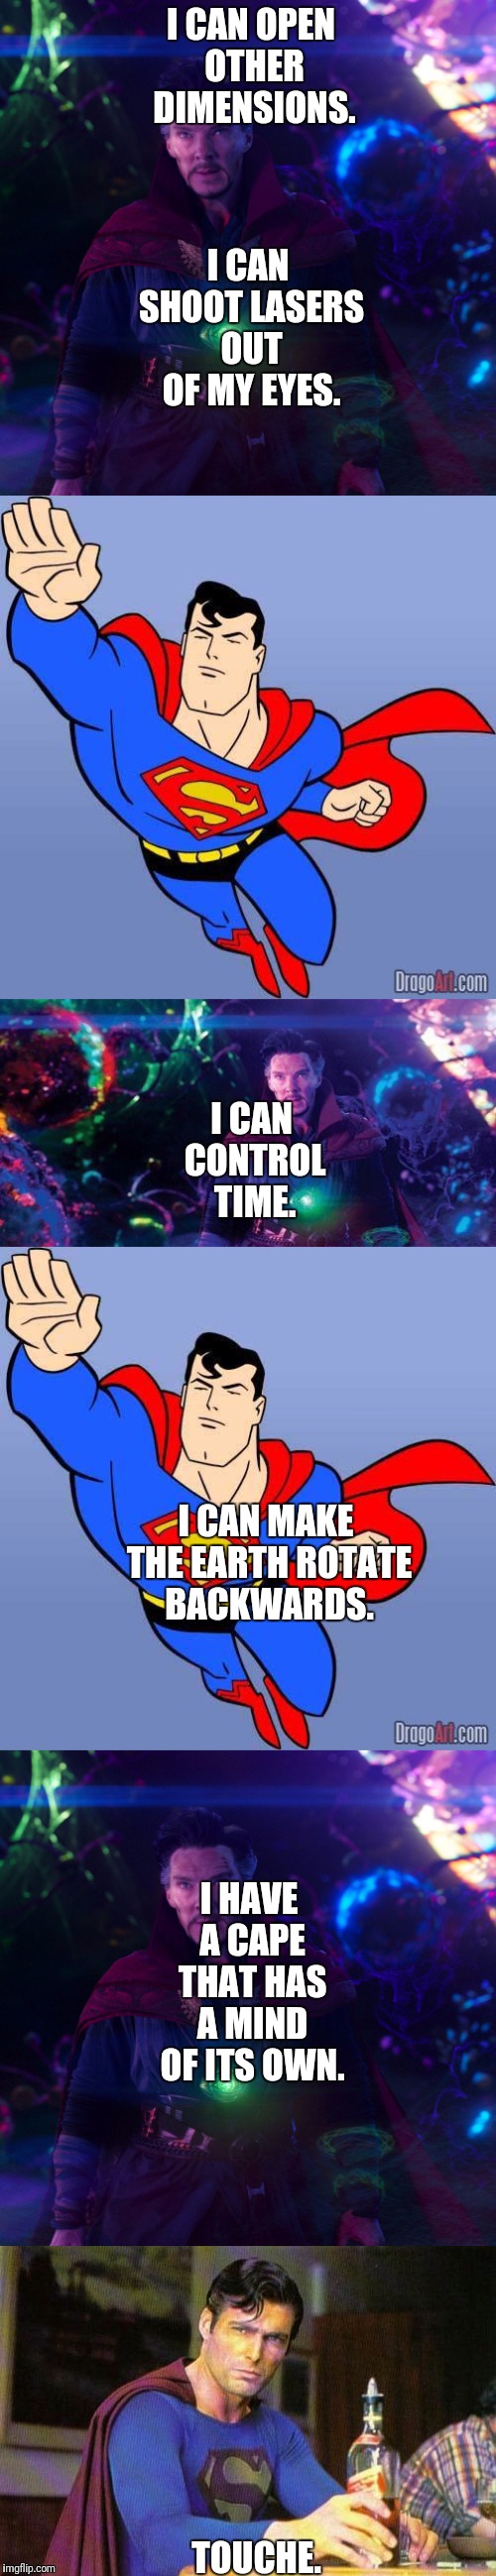 This meme took me forever to make. | I CAN SHOOT LASERS OUT OF MY EYES. I CAN OPEN OTHER DIMENSIONS. I CAN CONTROL TIME. I CAN MAKE THE EARTH ROTATE BACKWARDS. I HAVE A CAPE THAT HAS A MIND OF ITS OWN. TOUCHE. | image tagged in dr strange,superman,superheroes | made w/ Imgflip meme maker